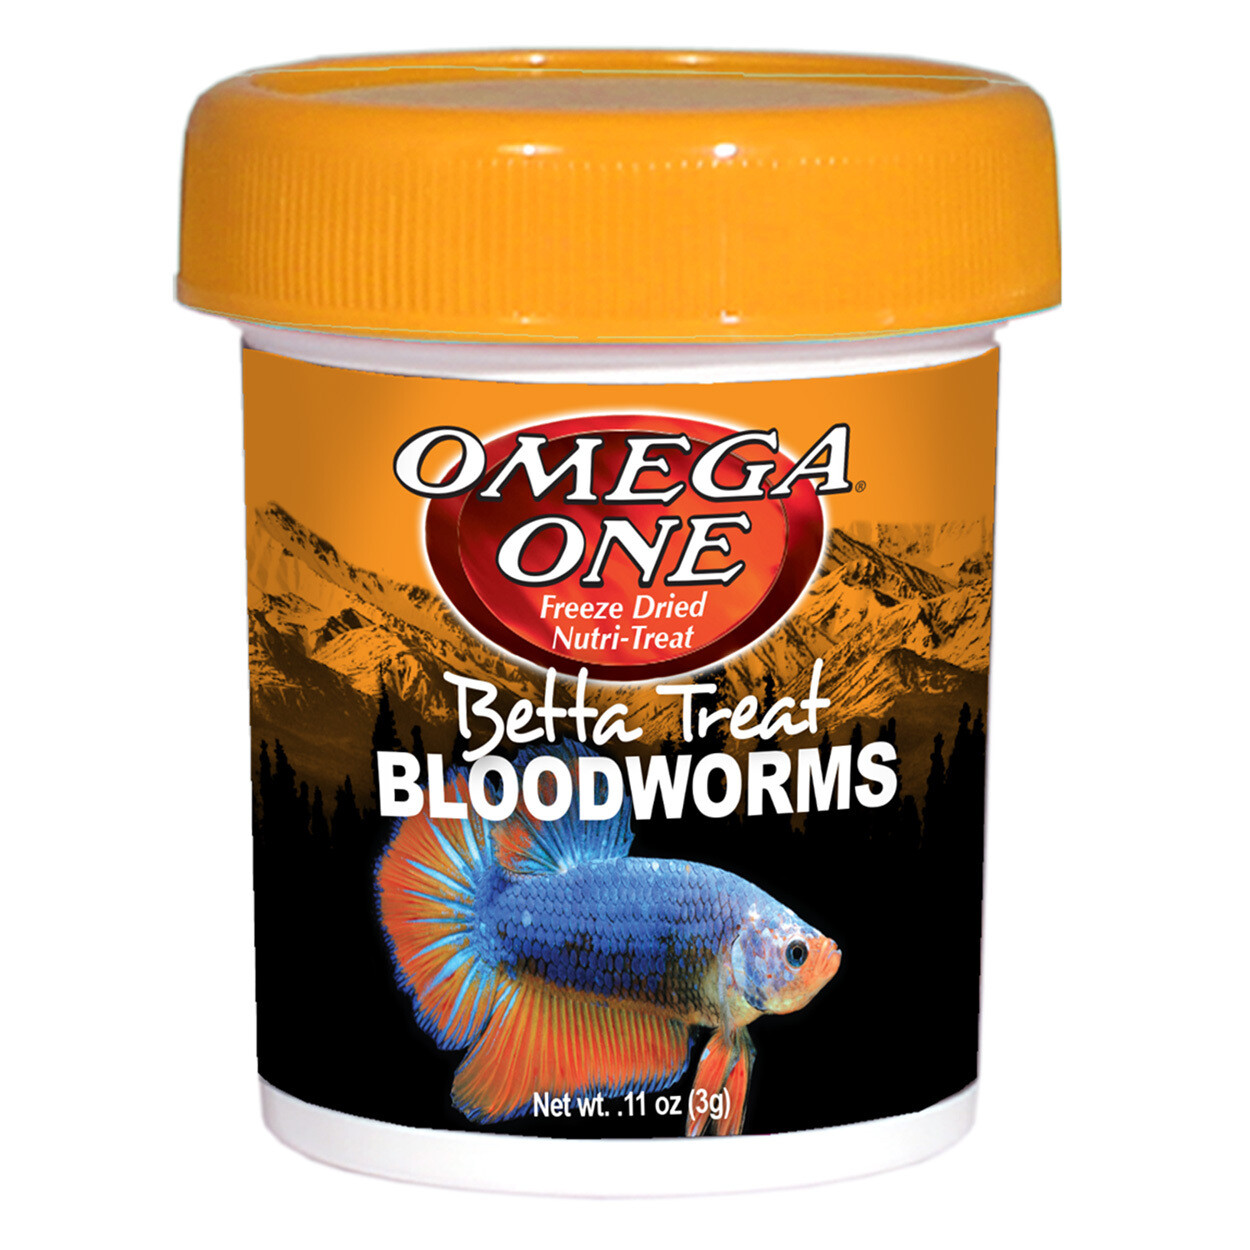 Omega One Betta Treat - Bloodworms 3 G